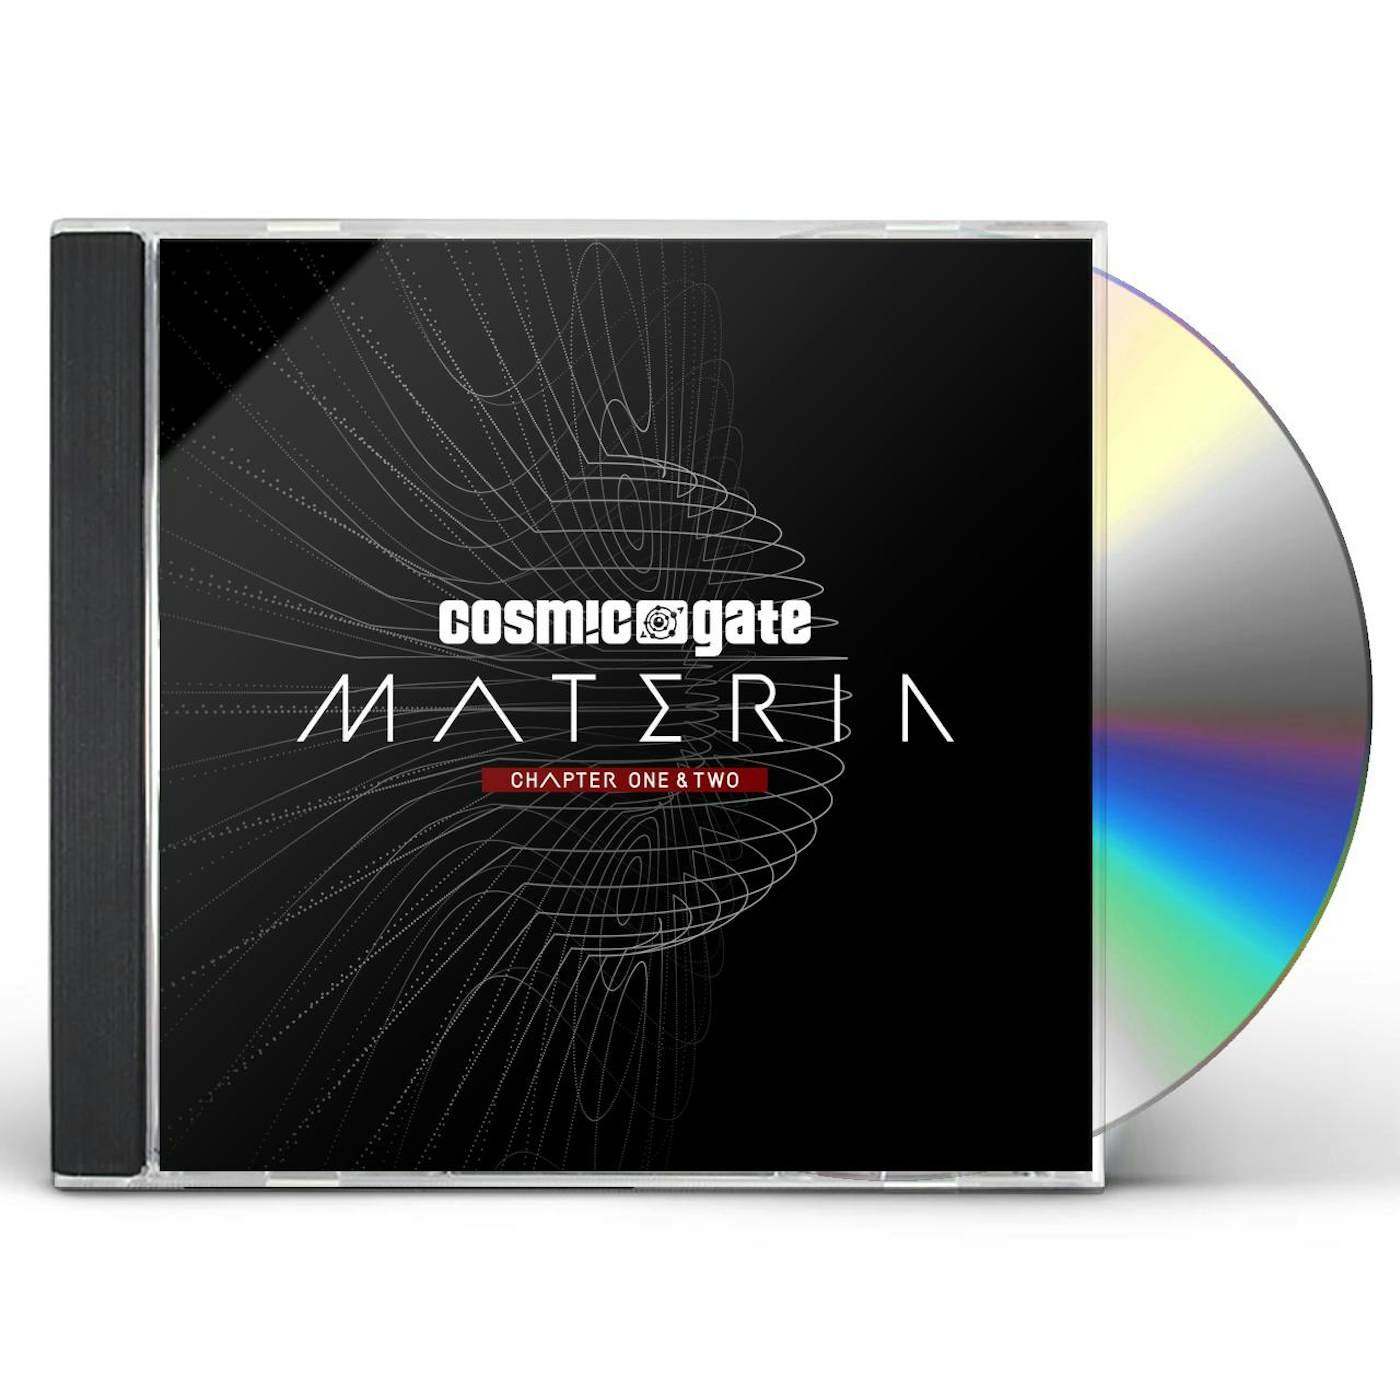 Cosmic Gate MATERIA CHAPTER ONE & TWO CD